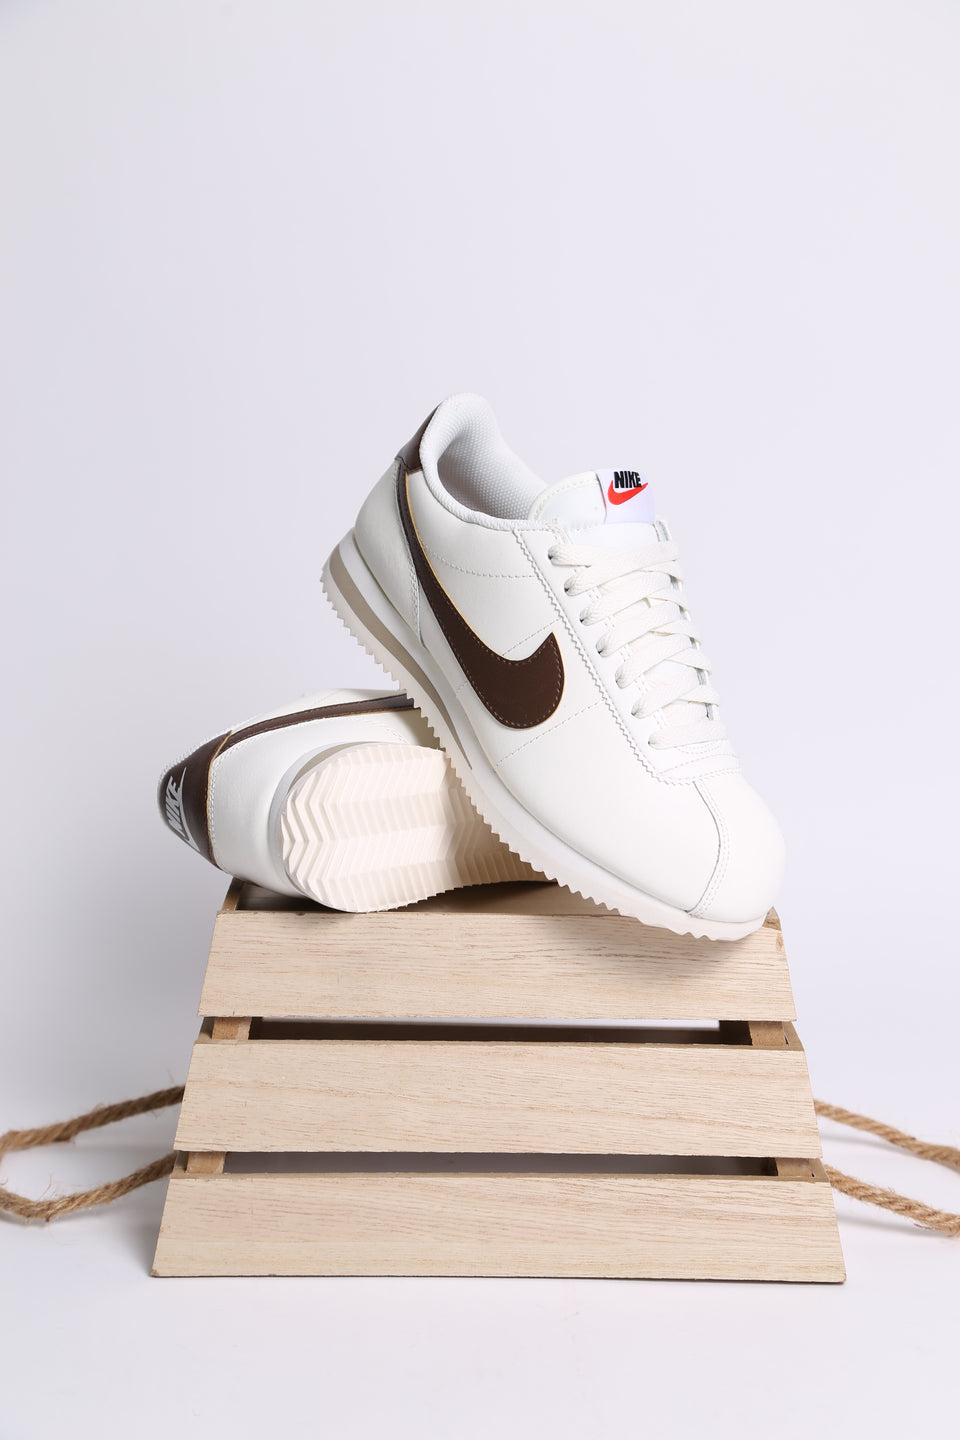 Nike Cortez Wmns - Cacao Wow